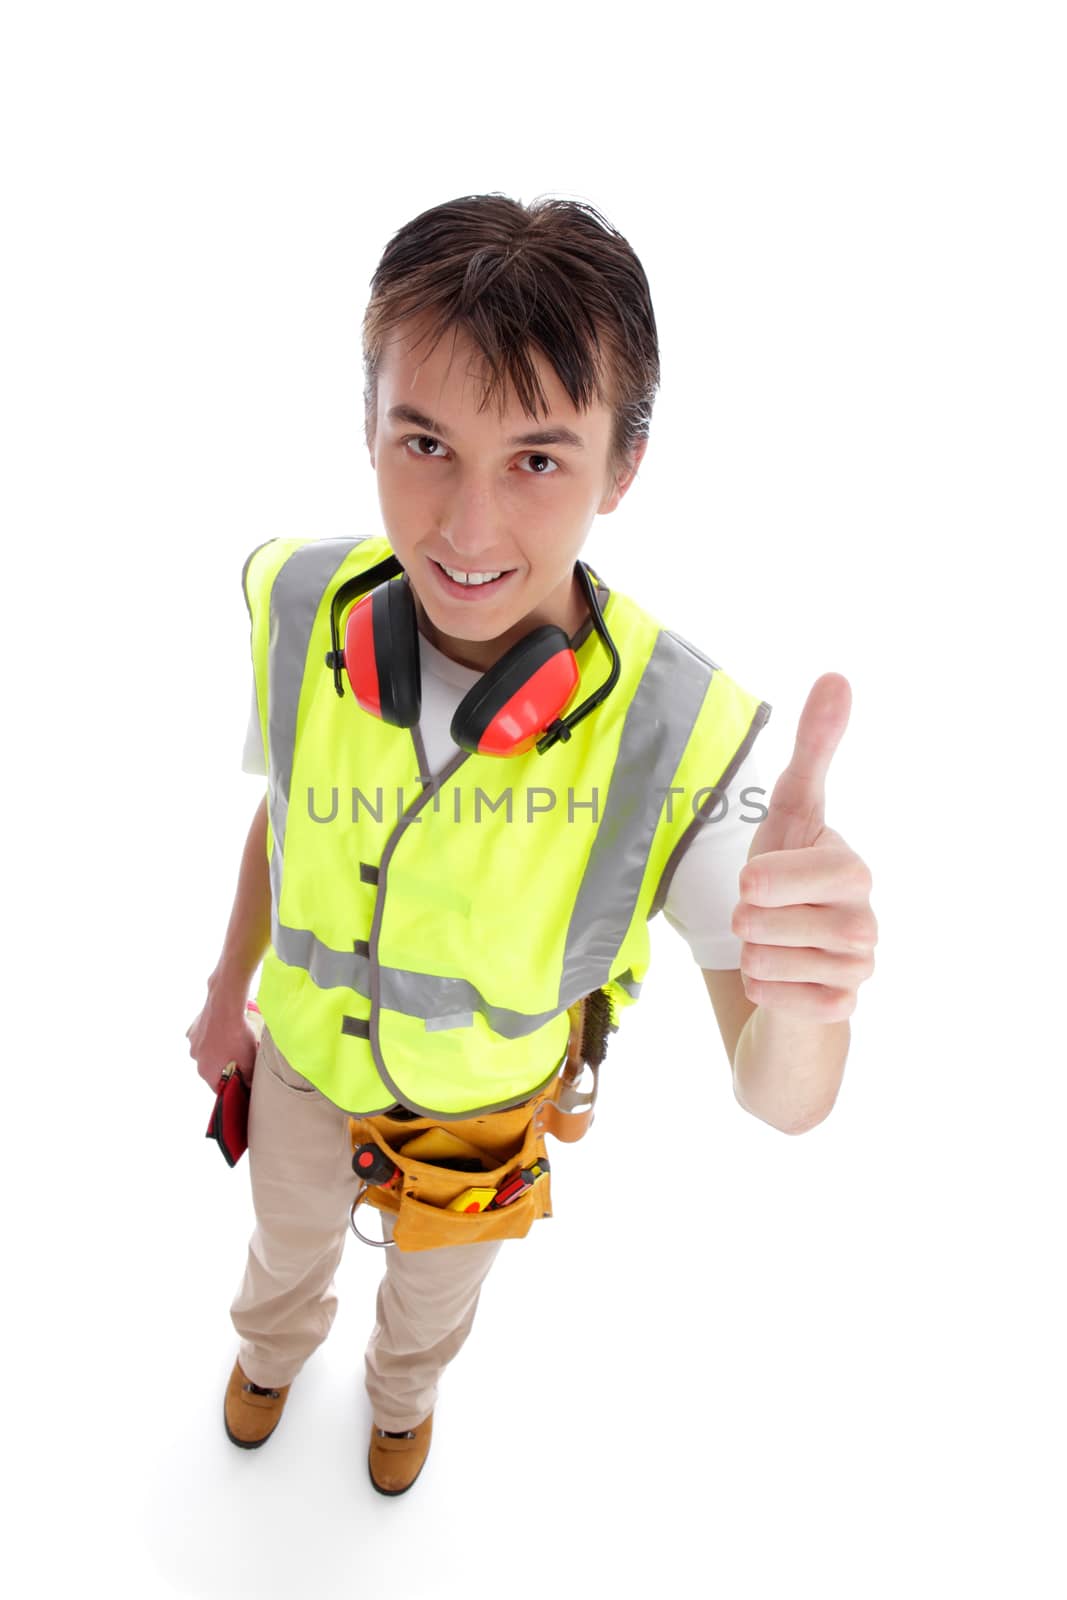 Smiling apprentice builder thumbs up.  White background.